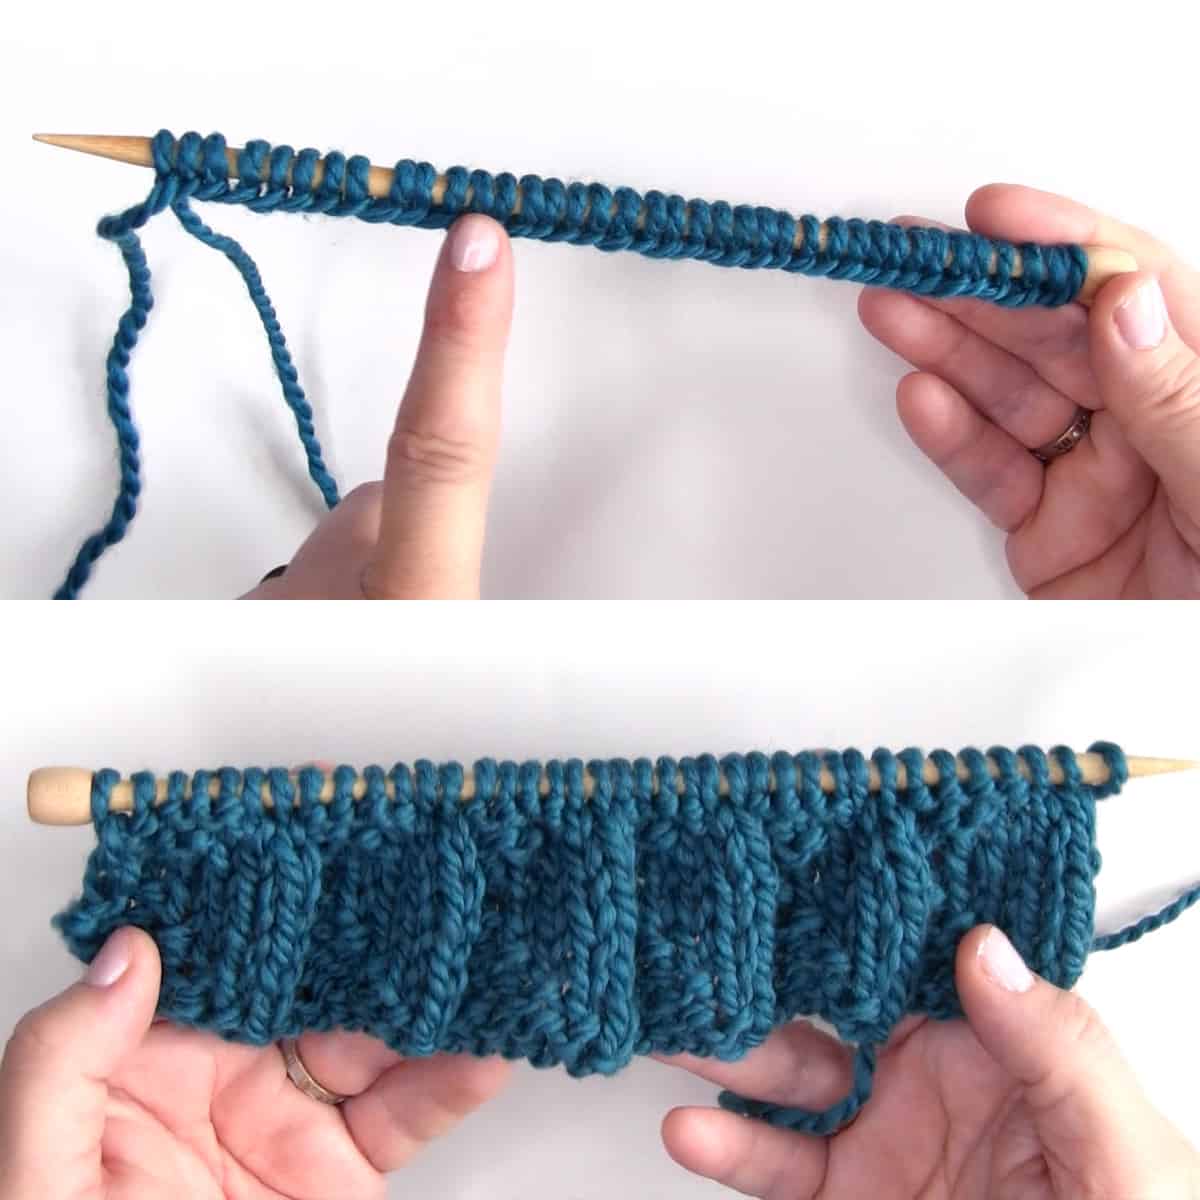 Casting on stitches onto a straight knitting needle with blue yarn to make a scarf.